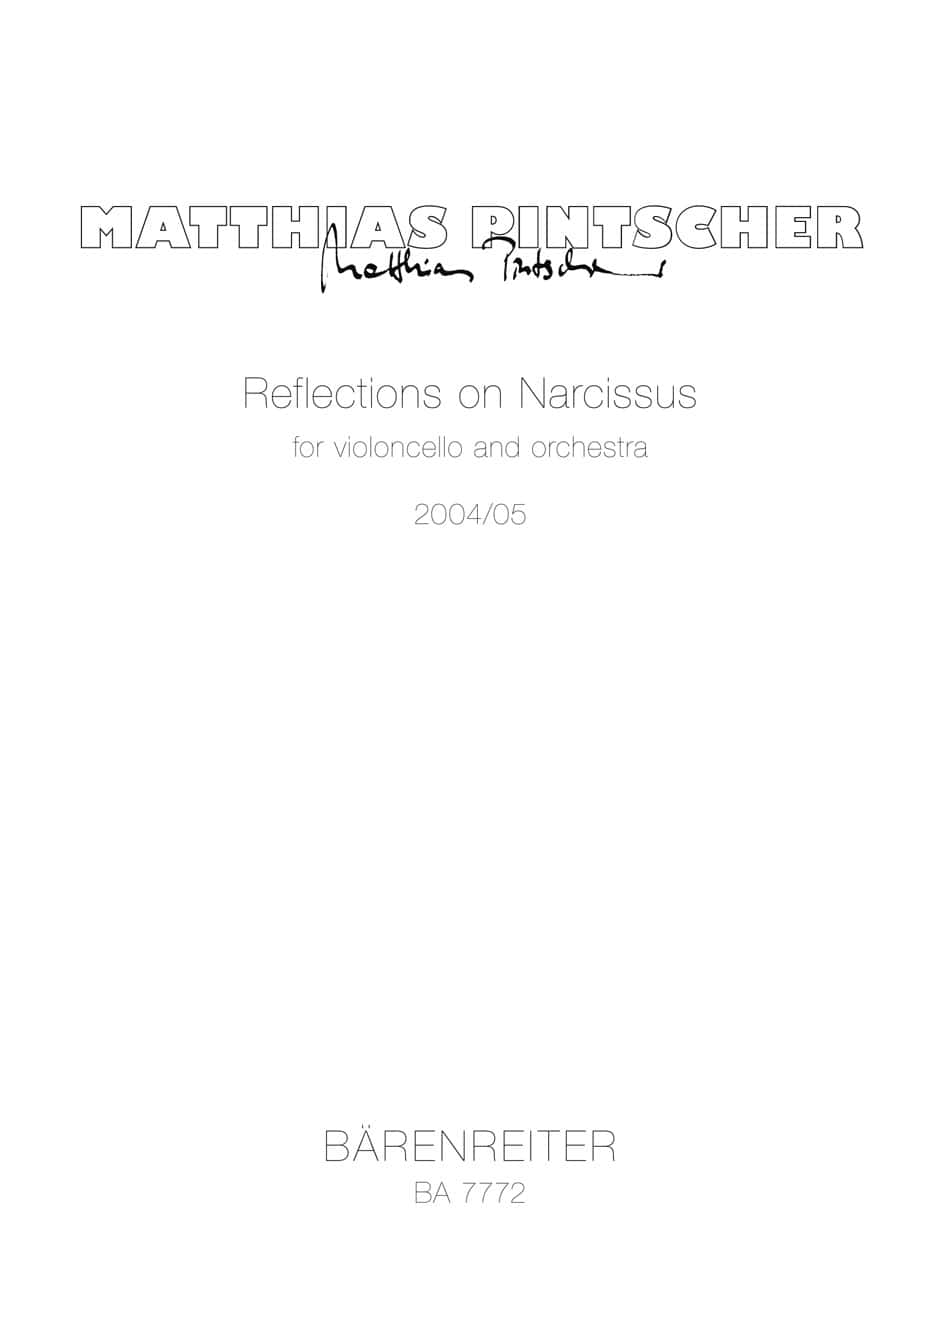 BARENREITER PINTSCHER MATTHIAS - REFLECTIONS ON NARCISSUS FOR VIOLONCELLO AND ORCHESTRA